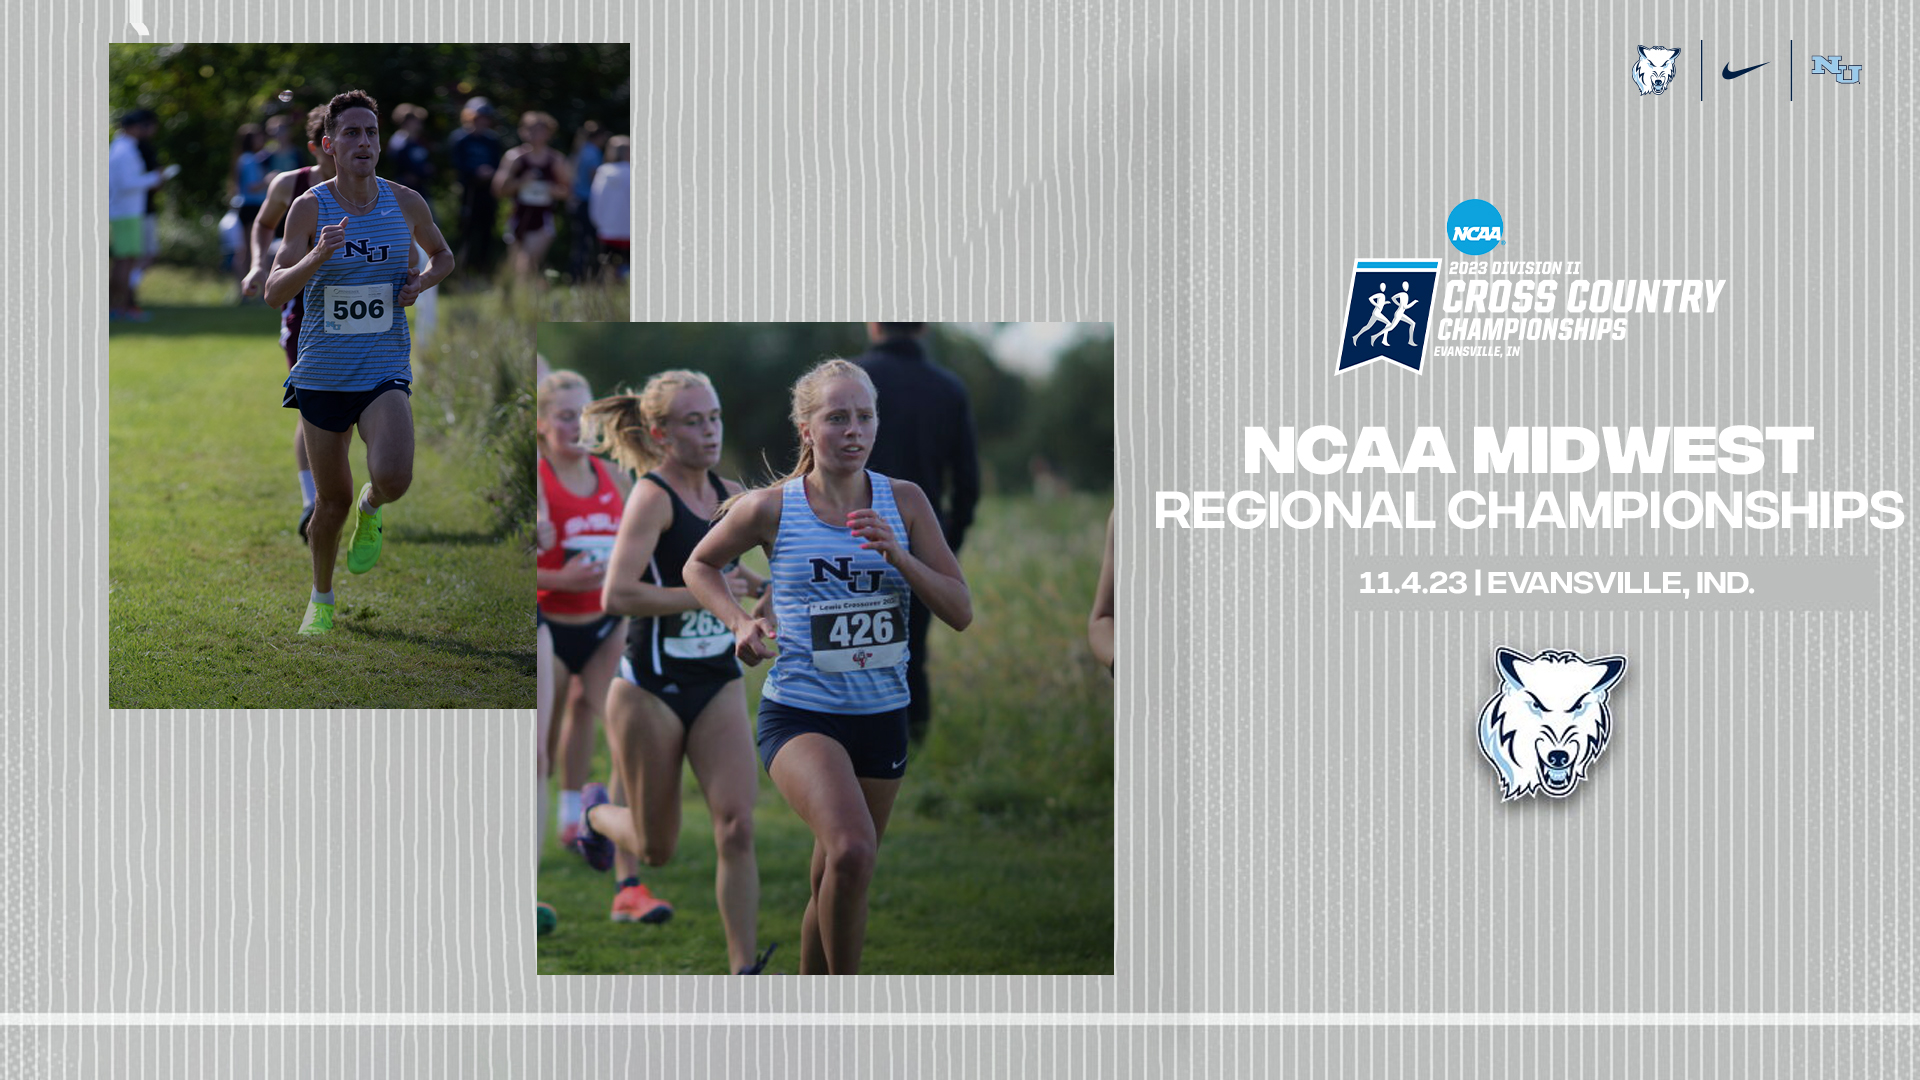 Women's Cross Country Sets Numerous Personal Records As Teams Compete At Midwest Regional